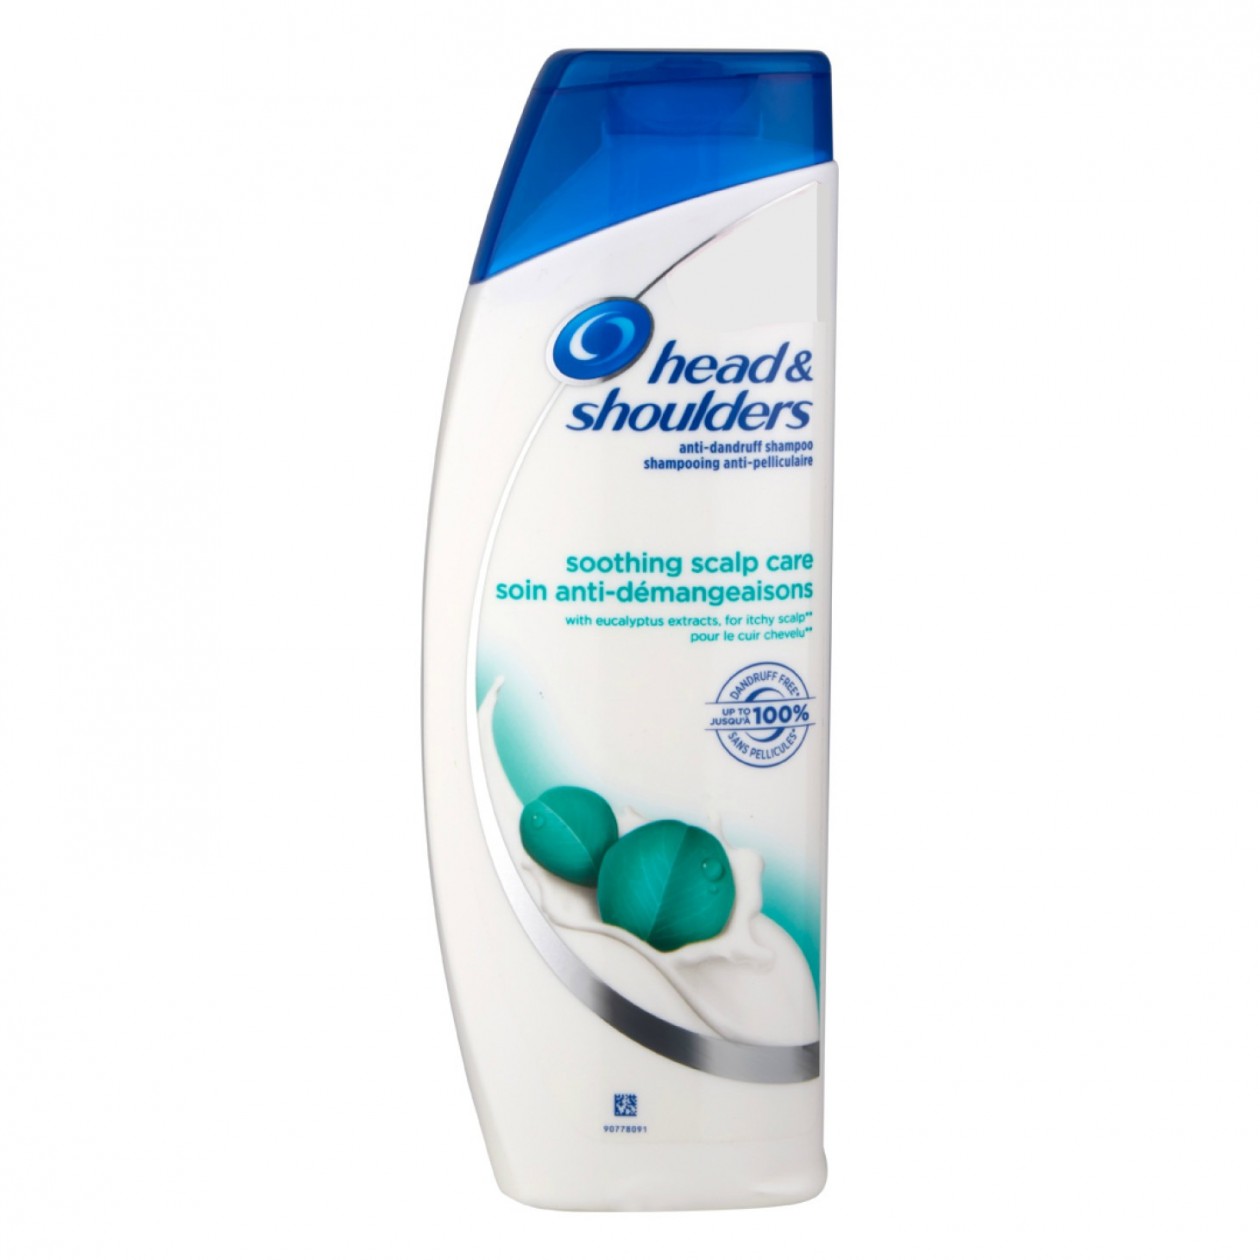 Head & Shoulders Shampoo Soothing Scalp Care 400mL